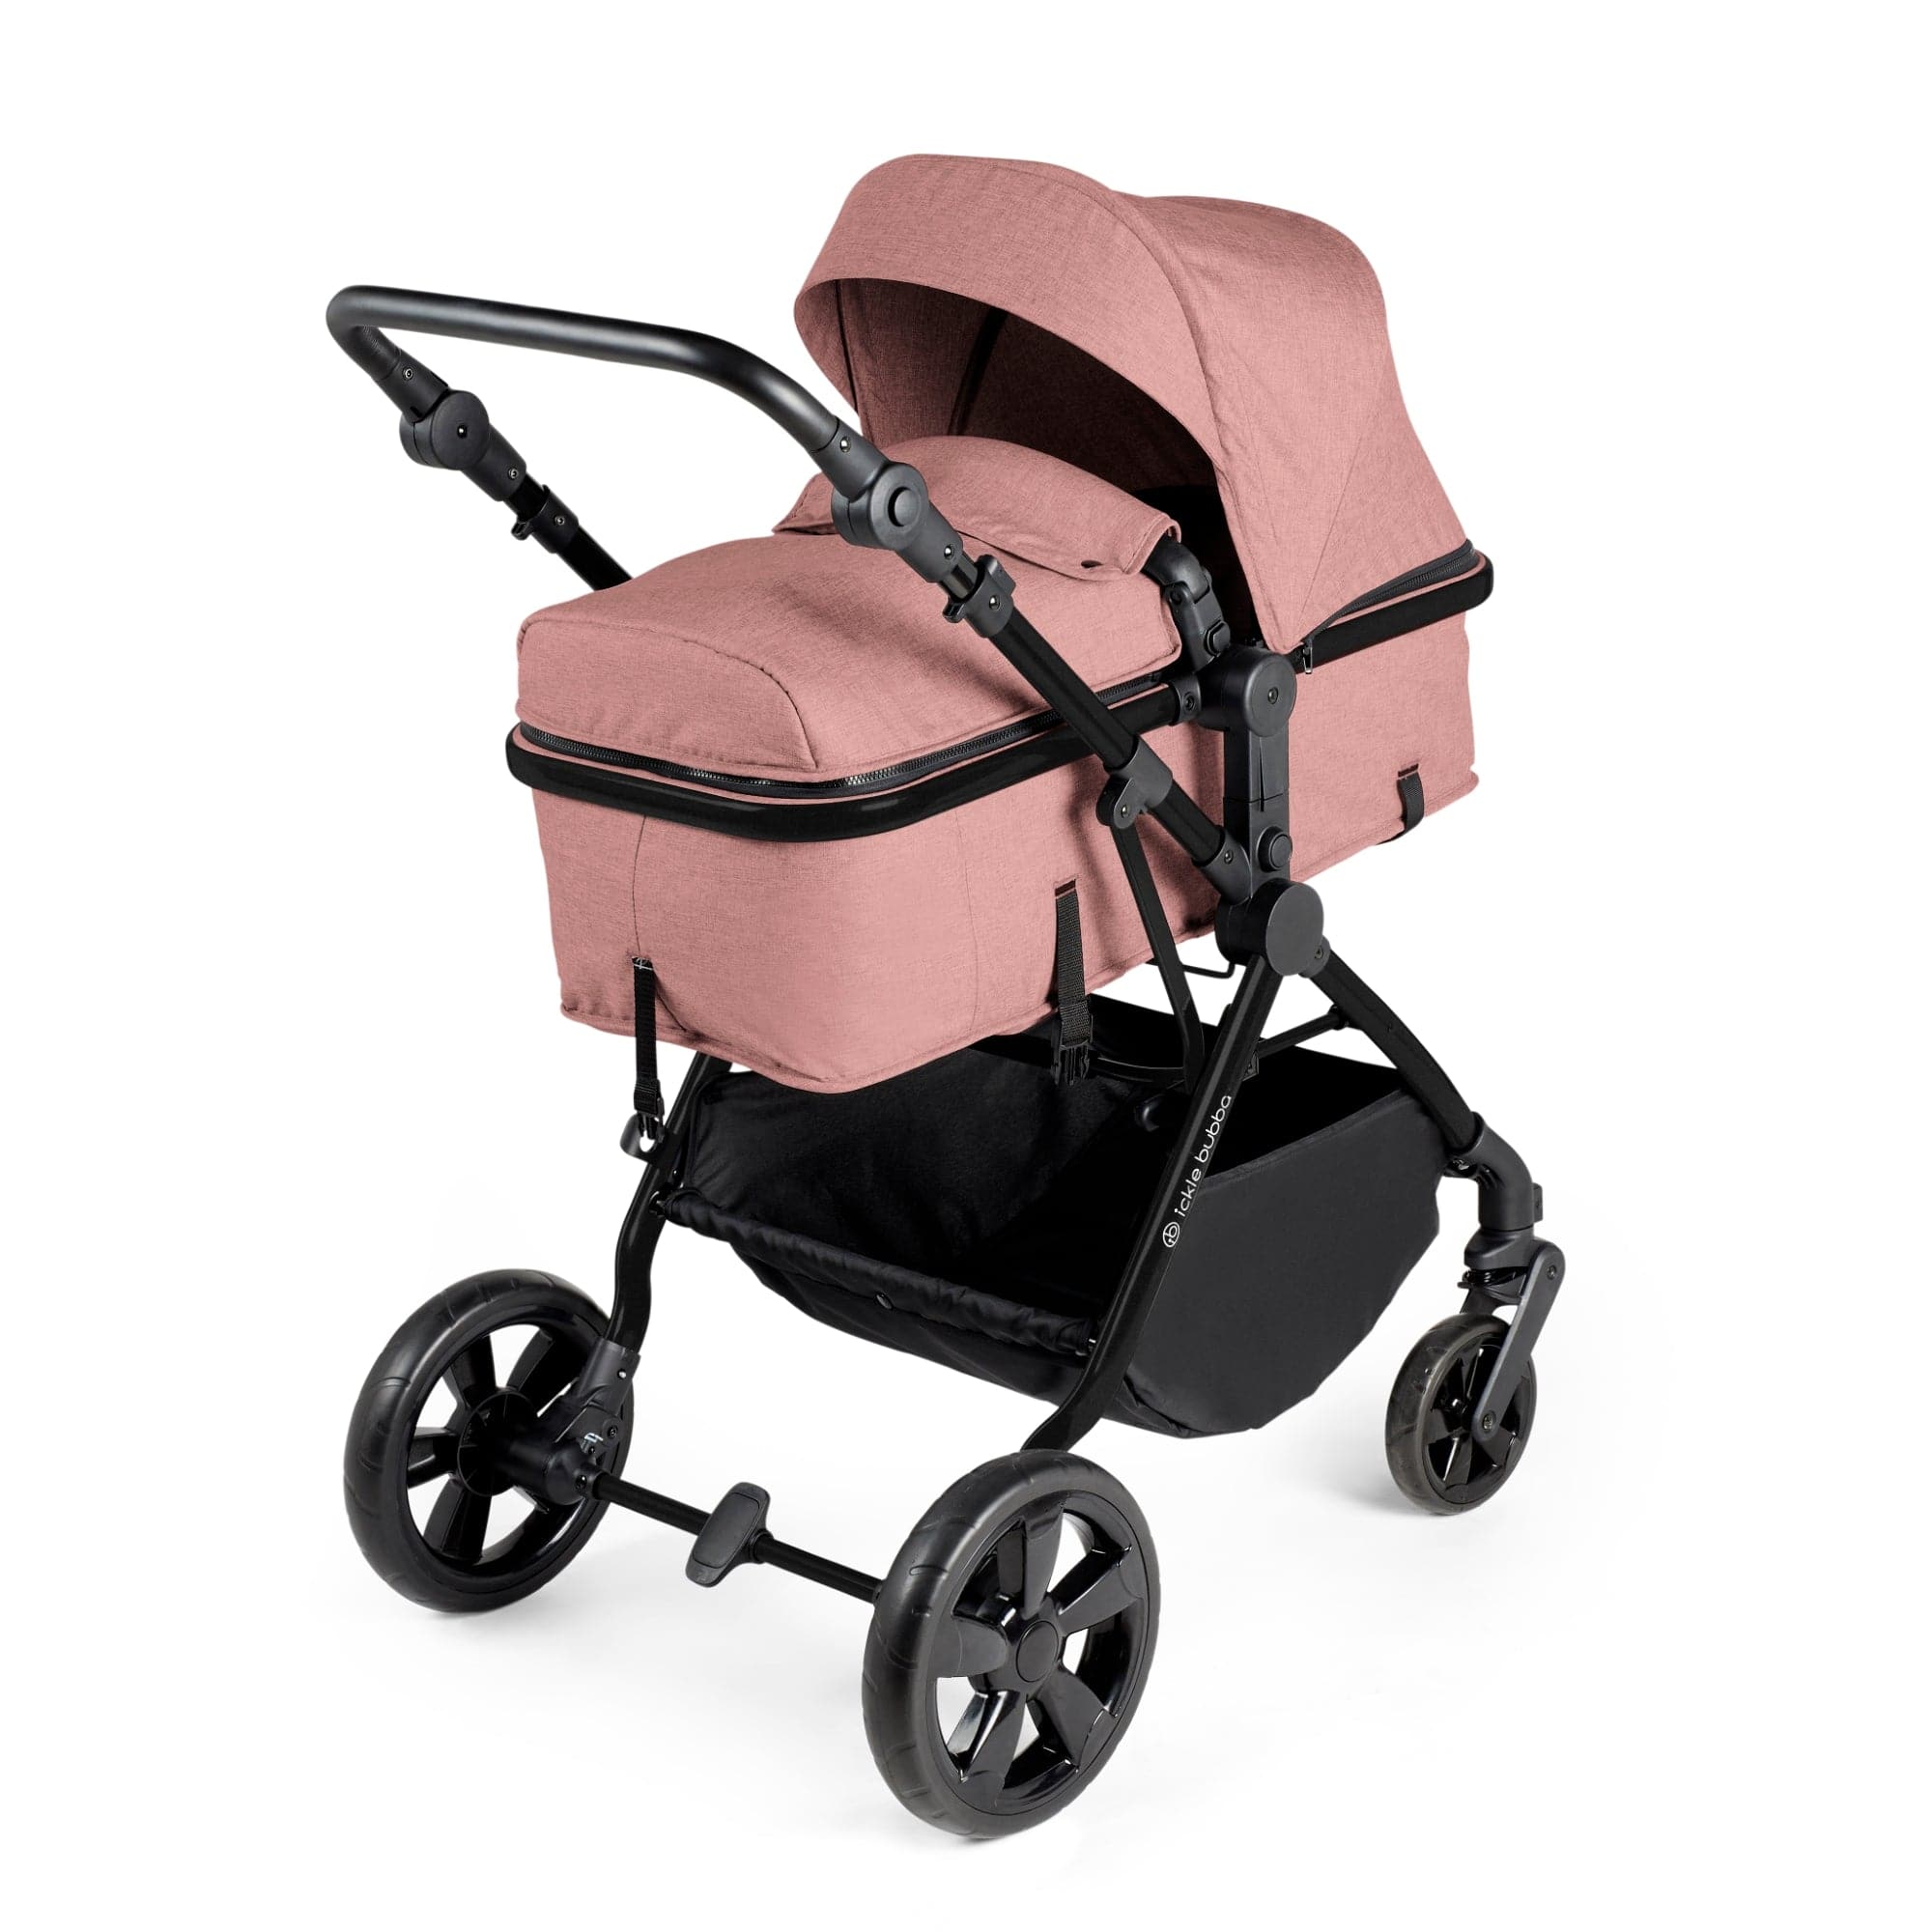 Ickle Bubba Comet 2-in-1 Plus Pushchair - Dusky Pink   